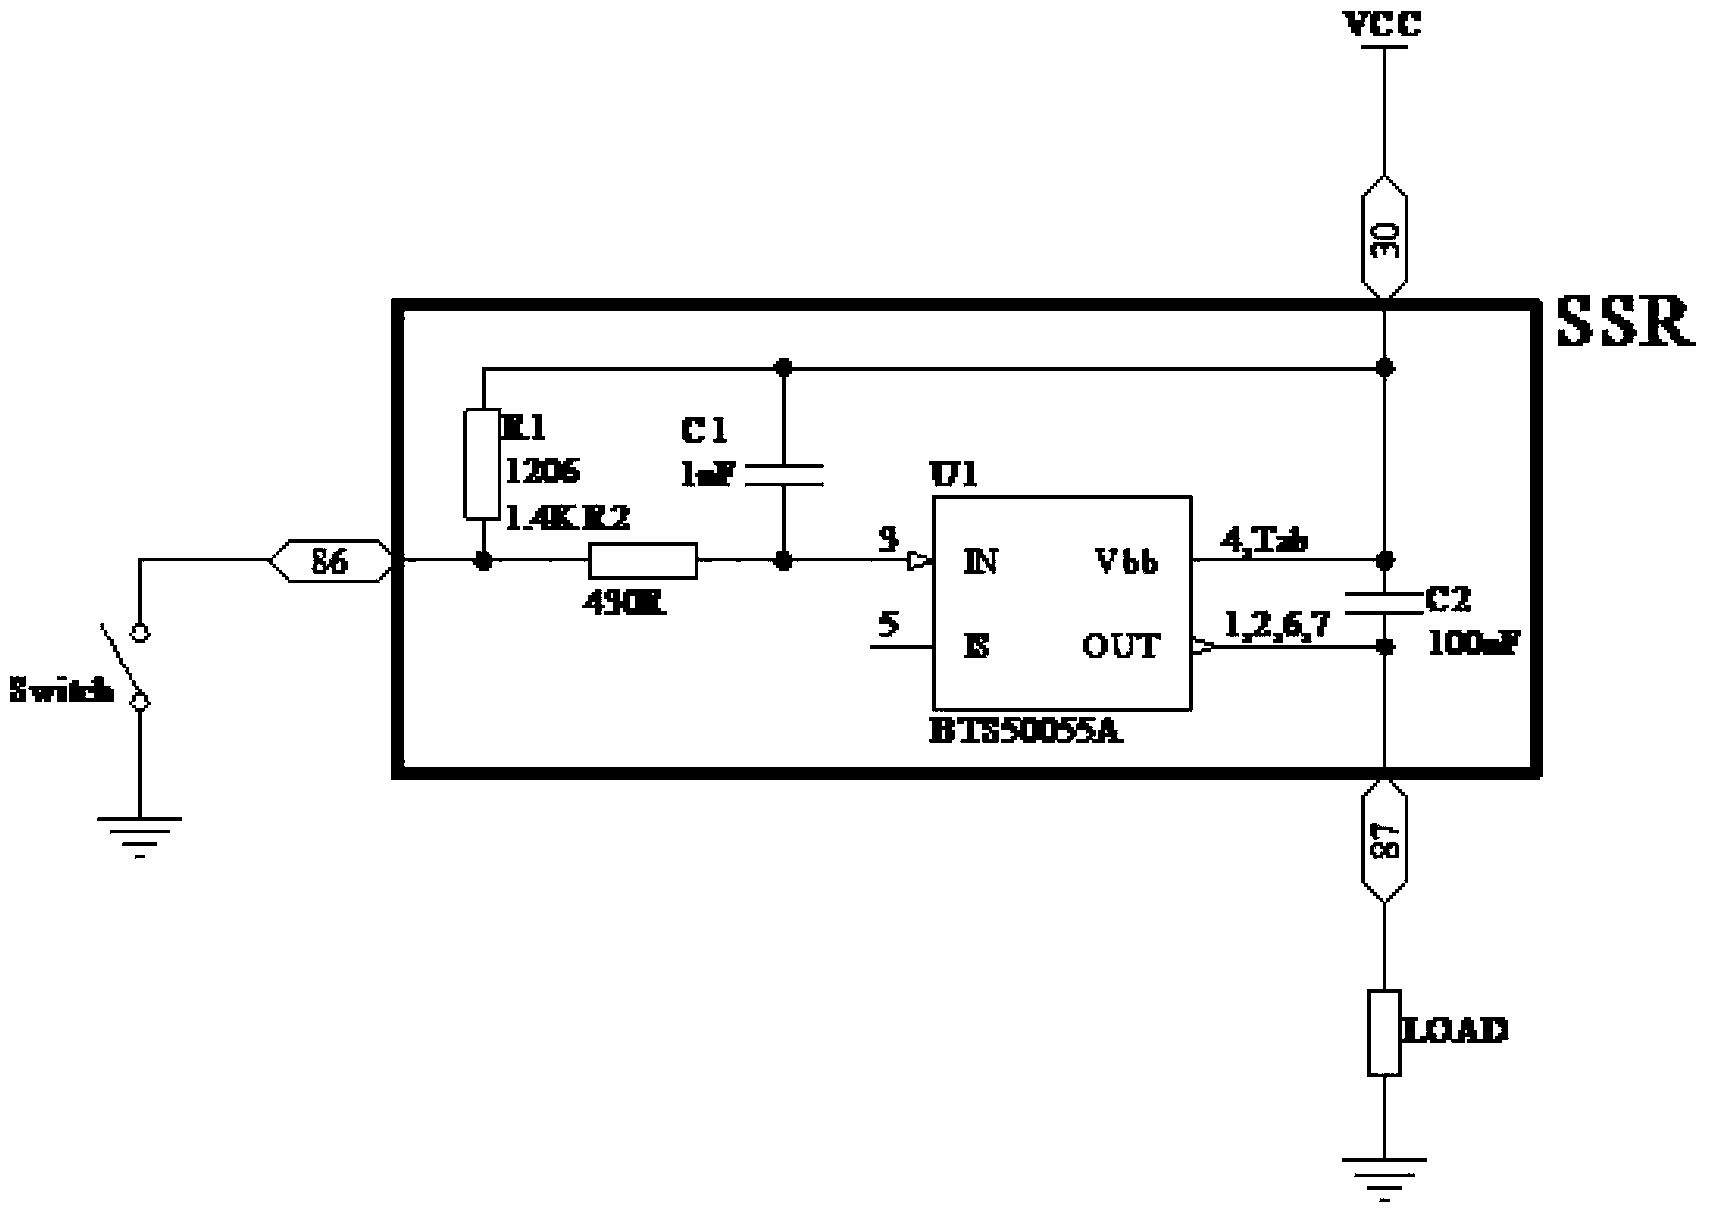 Vehicle solid-state relay